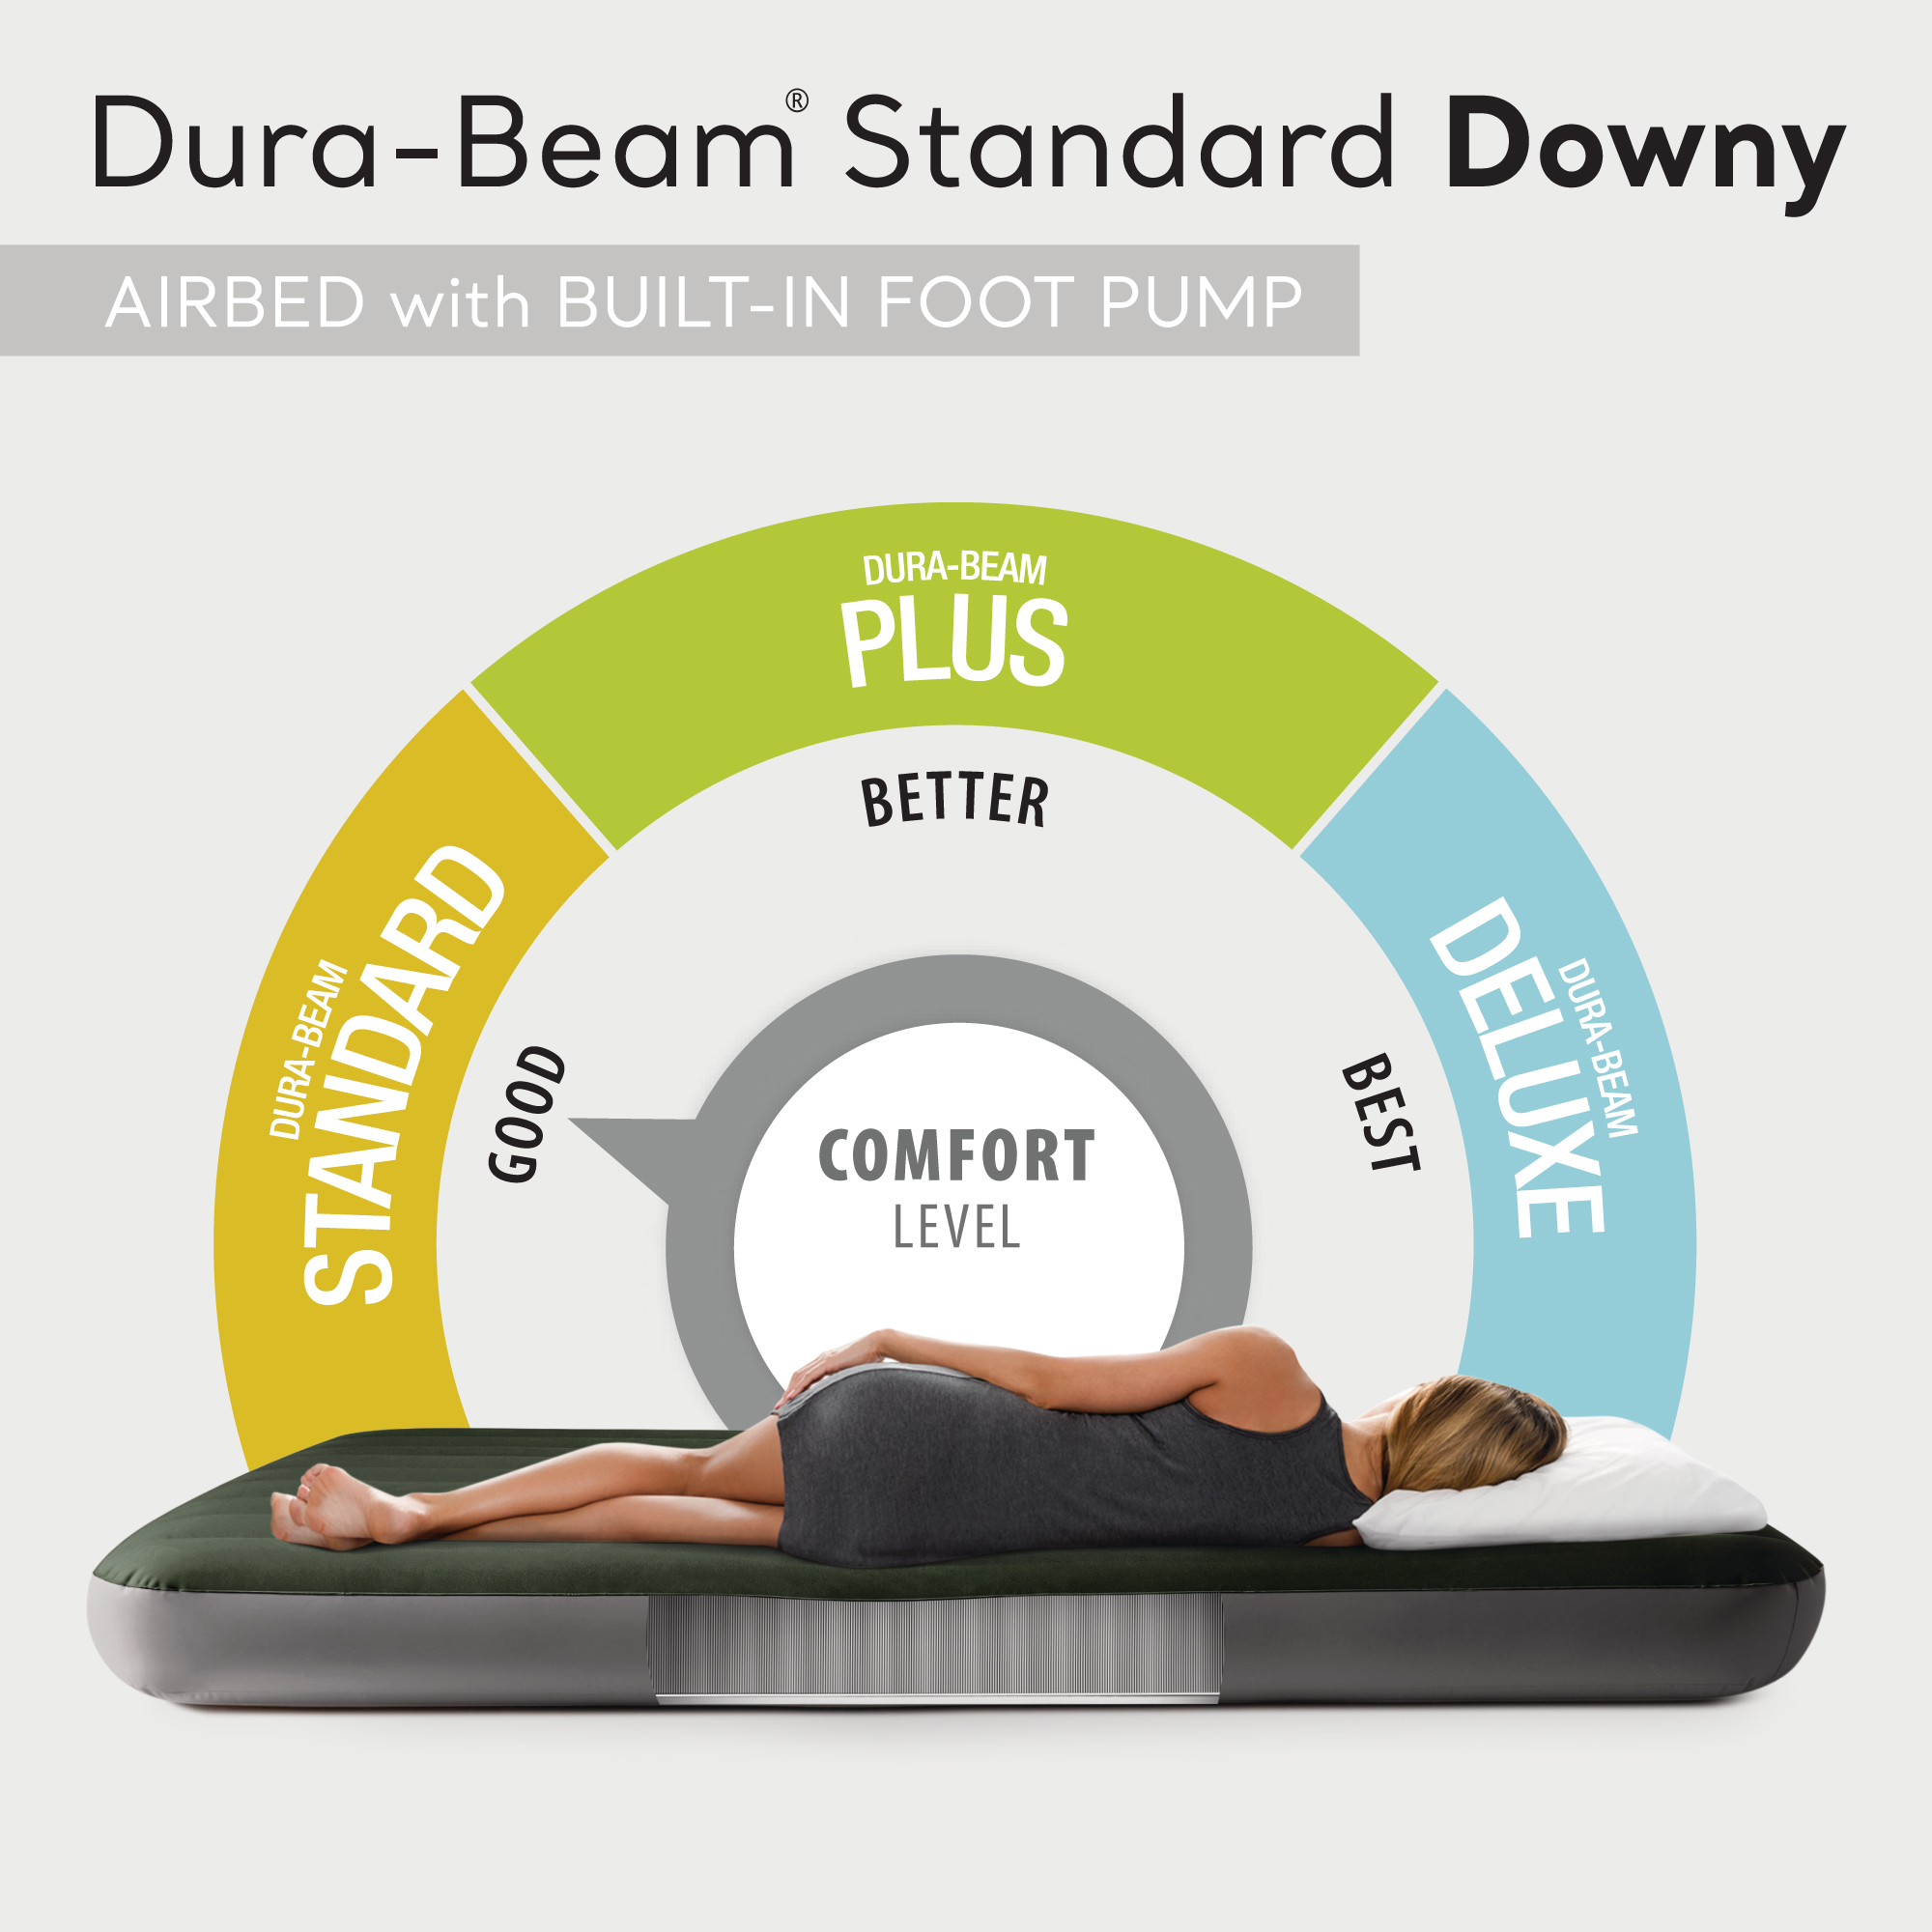 Intex Dura-Beam Standard Series Downy Airbed with Built-In Foot Pump, Twin Size - image 2 of 9